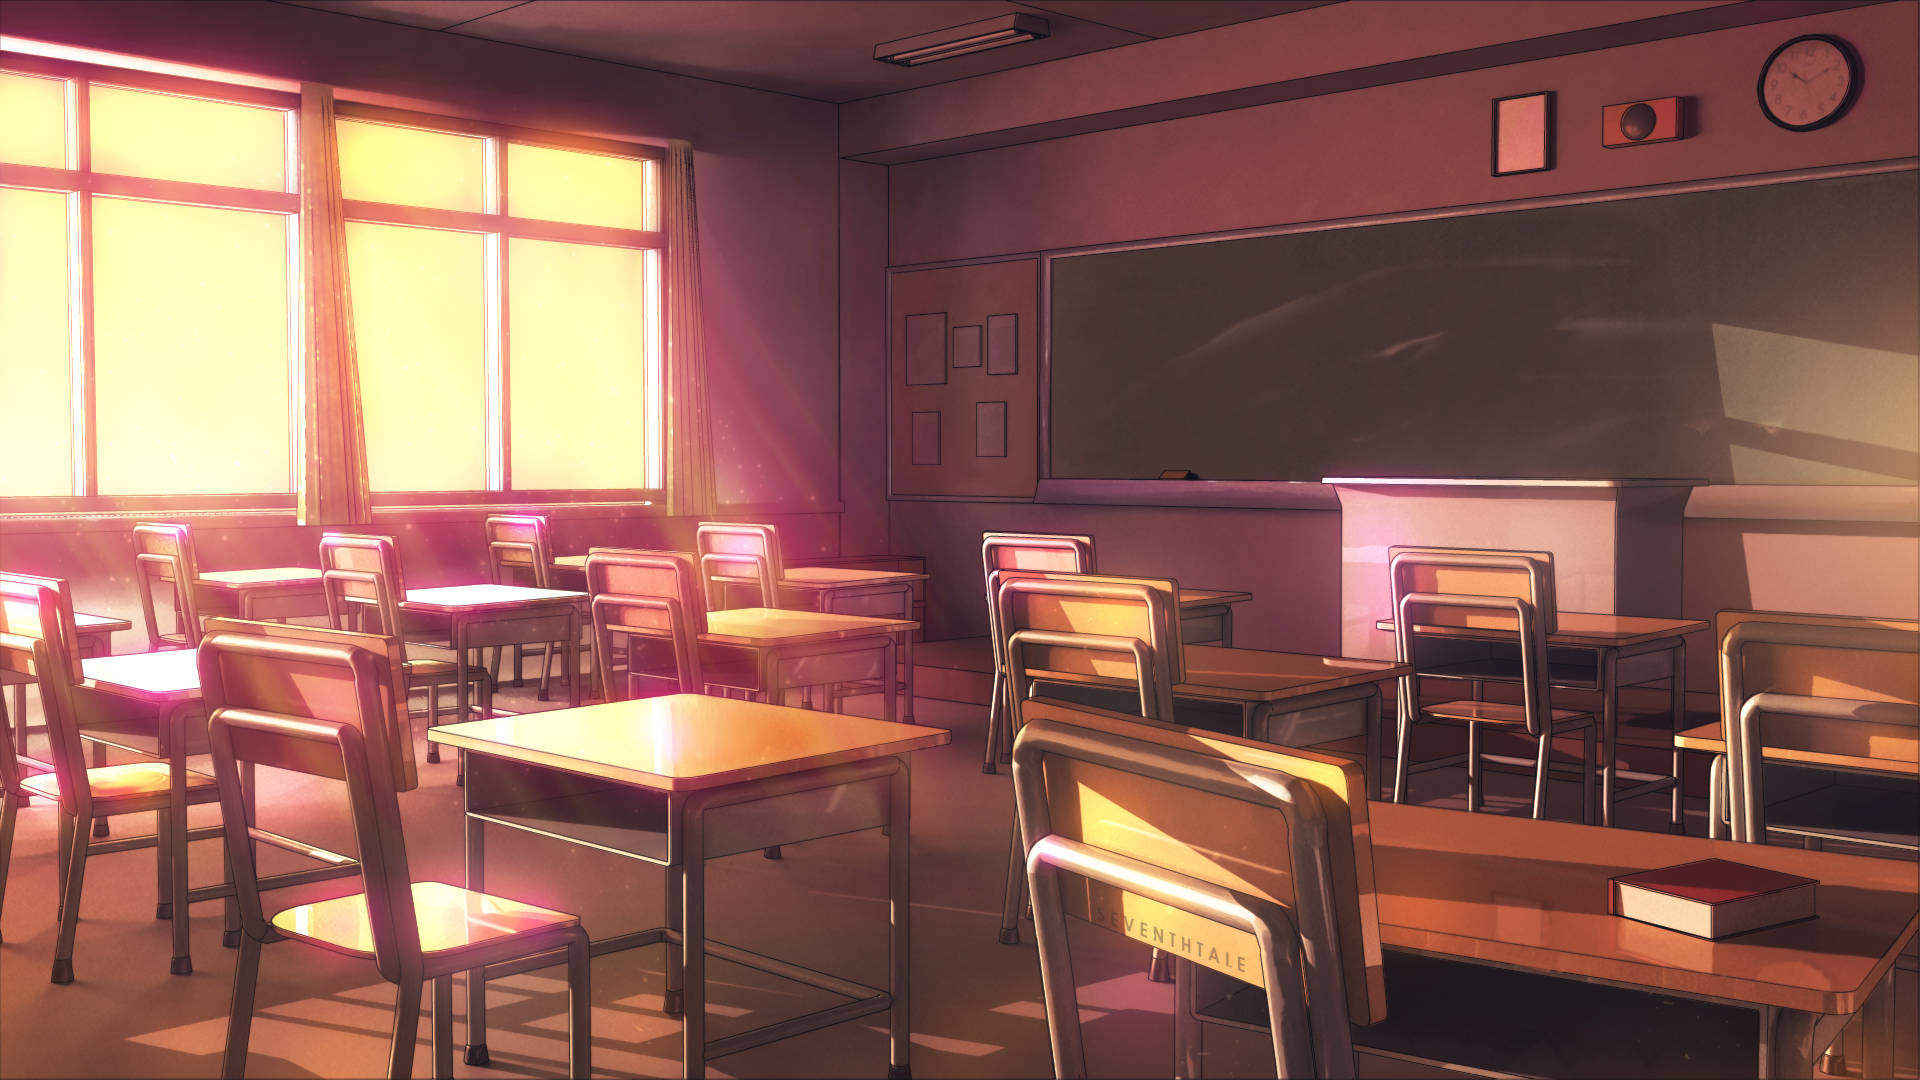 Anime Classroom On An Afternoon Wallpaper